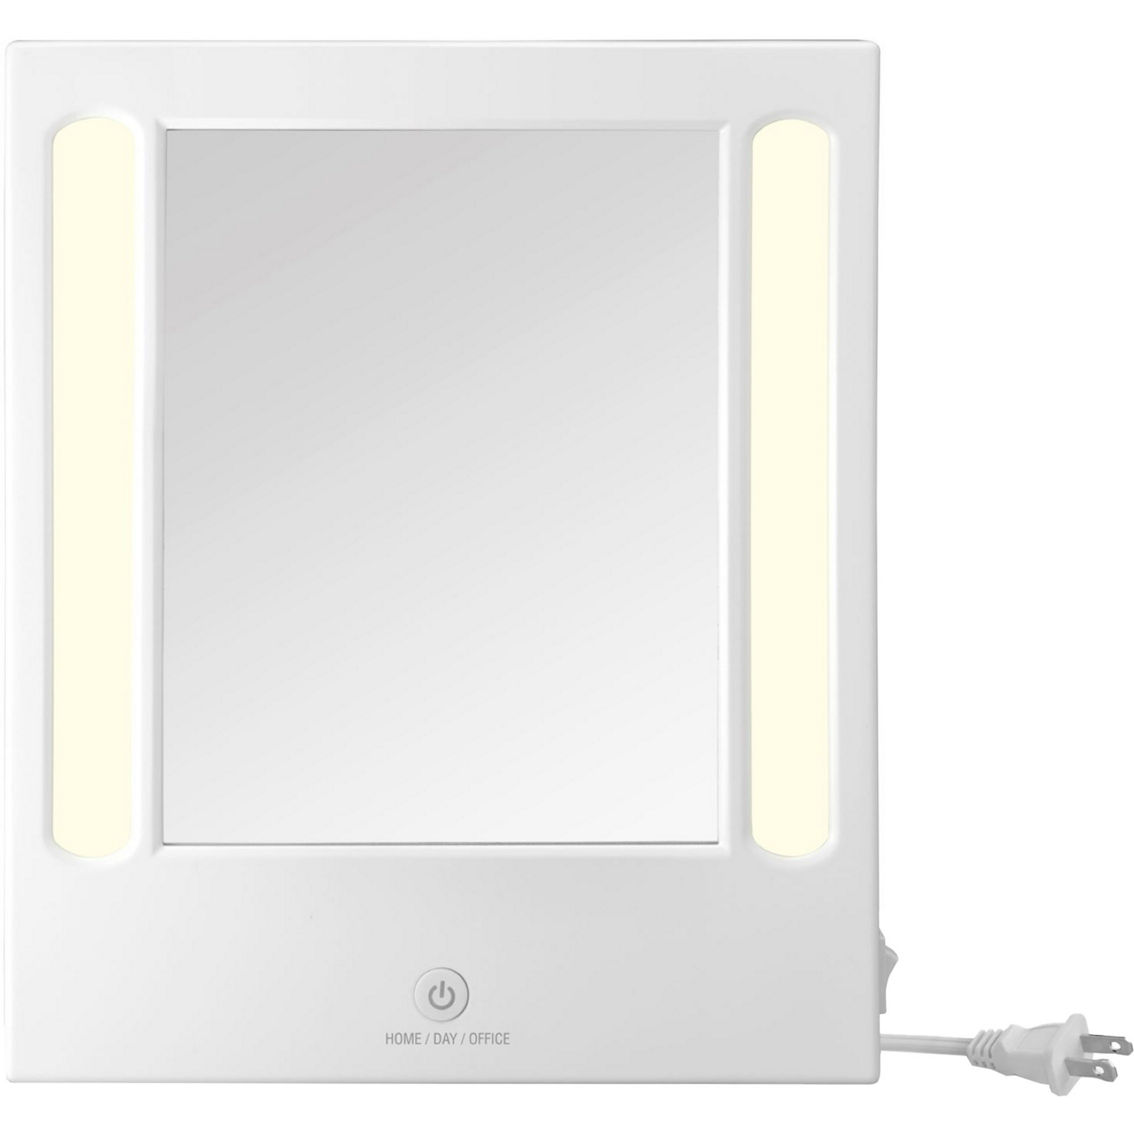 Conair LED Lighted Mirror - Image 2 of 6